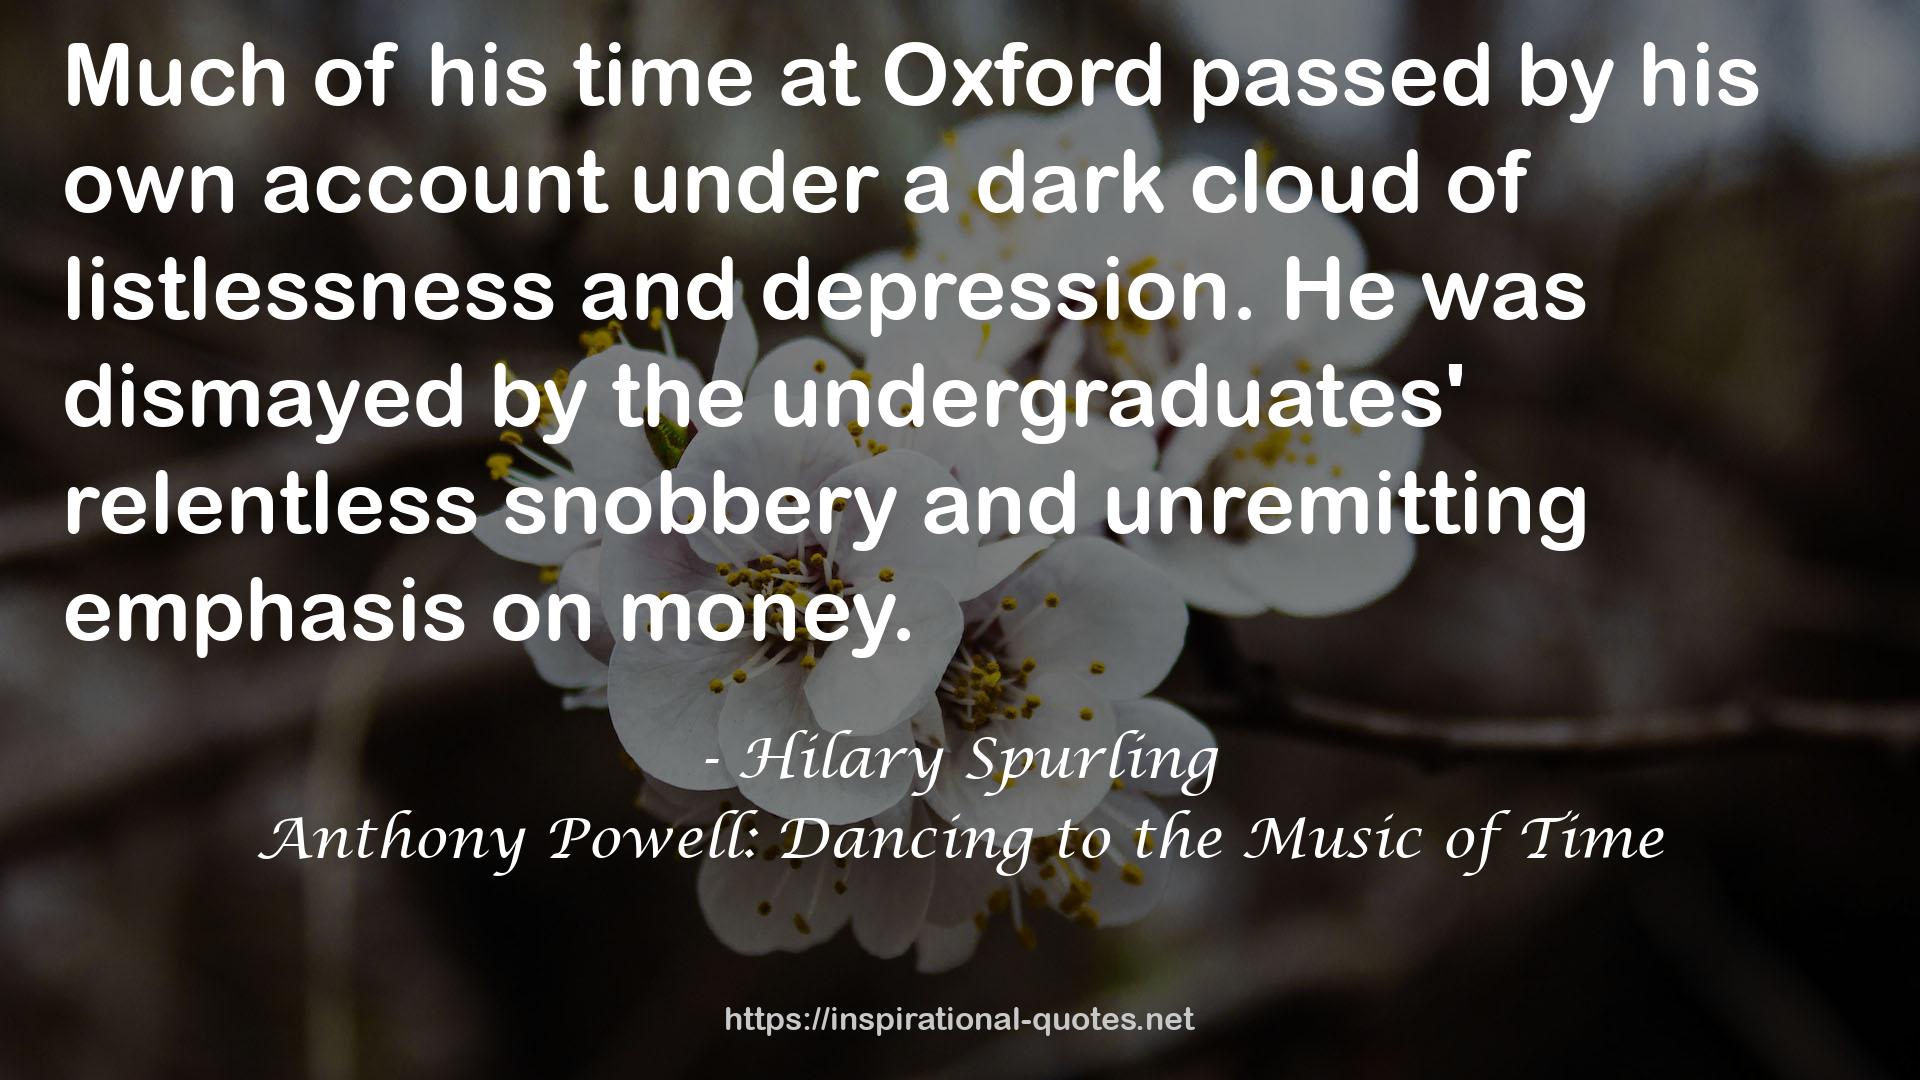 Anthony Powell: Dancing to the Music of Time QUOTES